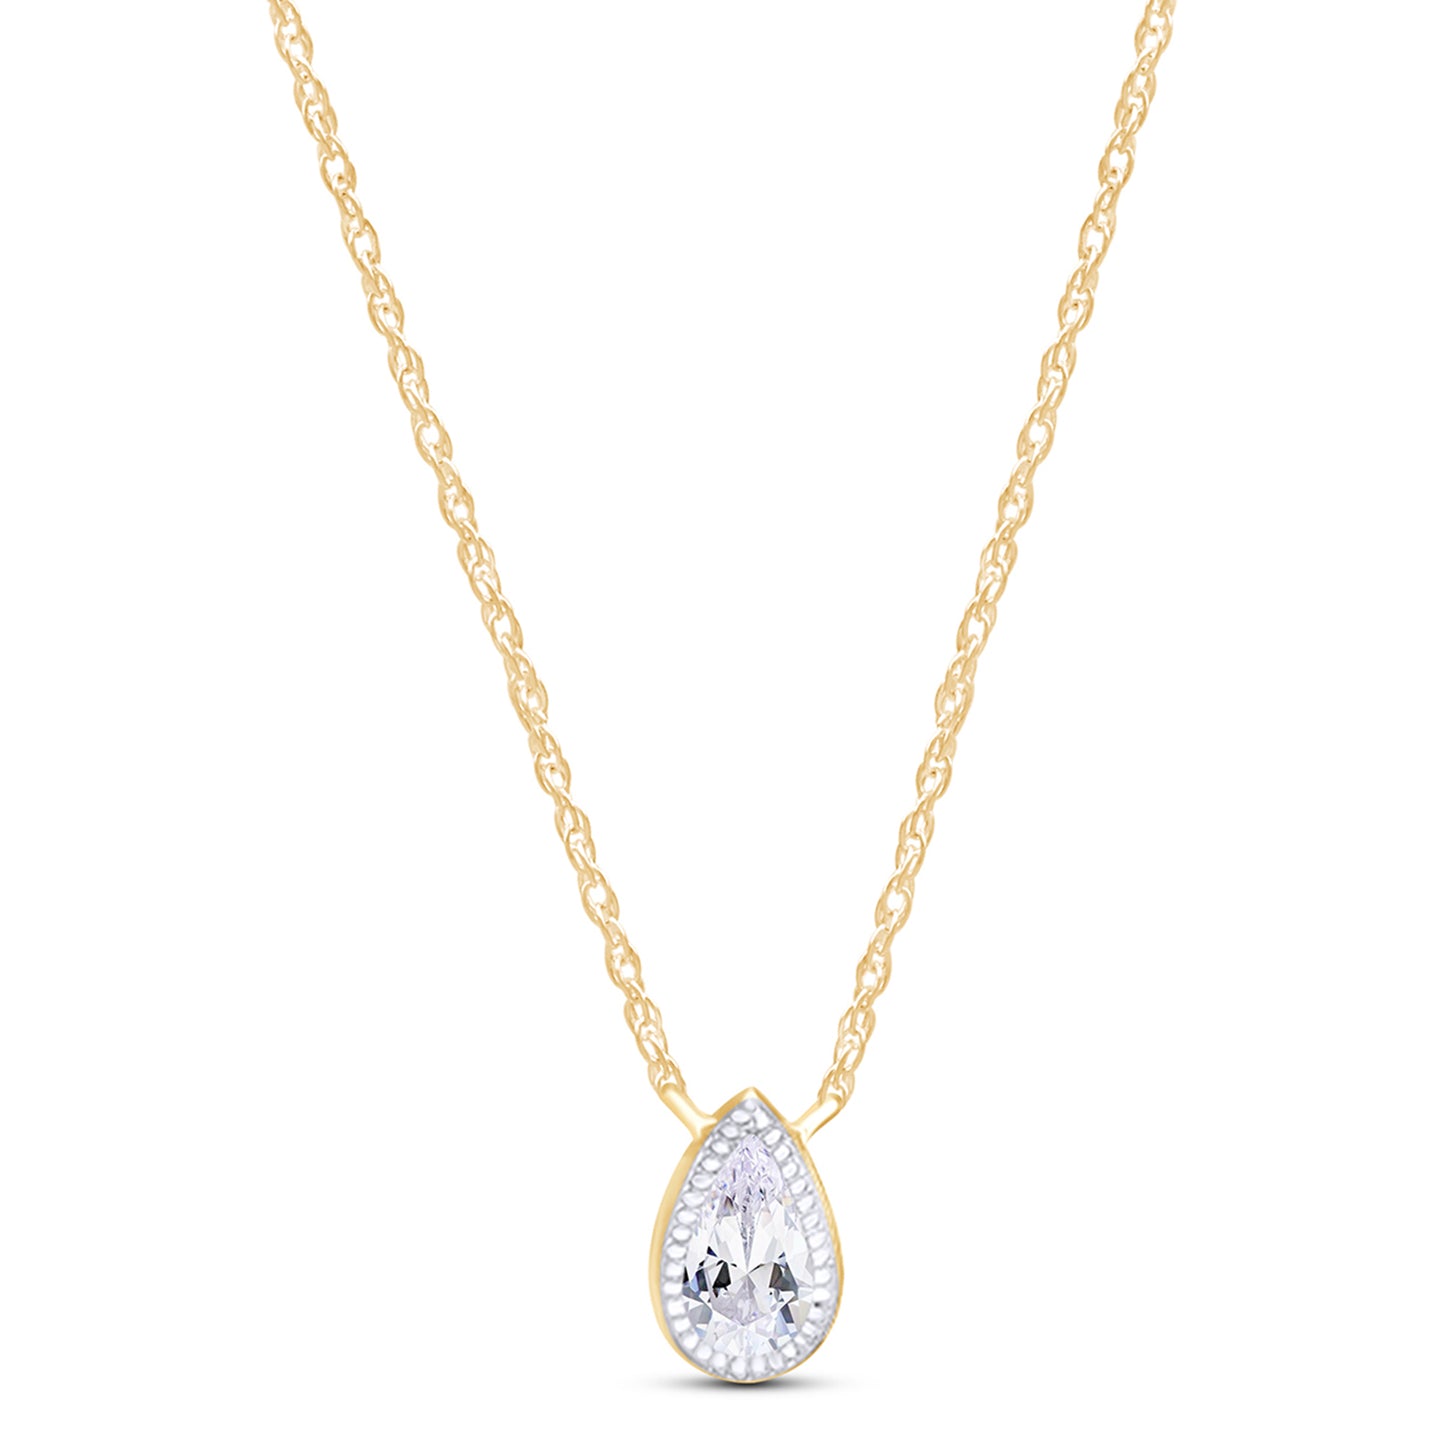 Load image into Gallery viewer, 1/5 Carat Pear Cut White Natural Diamond Solitaire Pendant Necklace In 925 Sterling Silver
